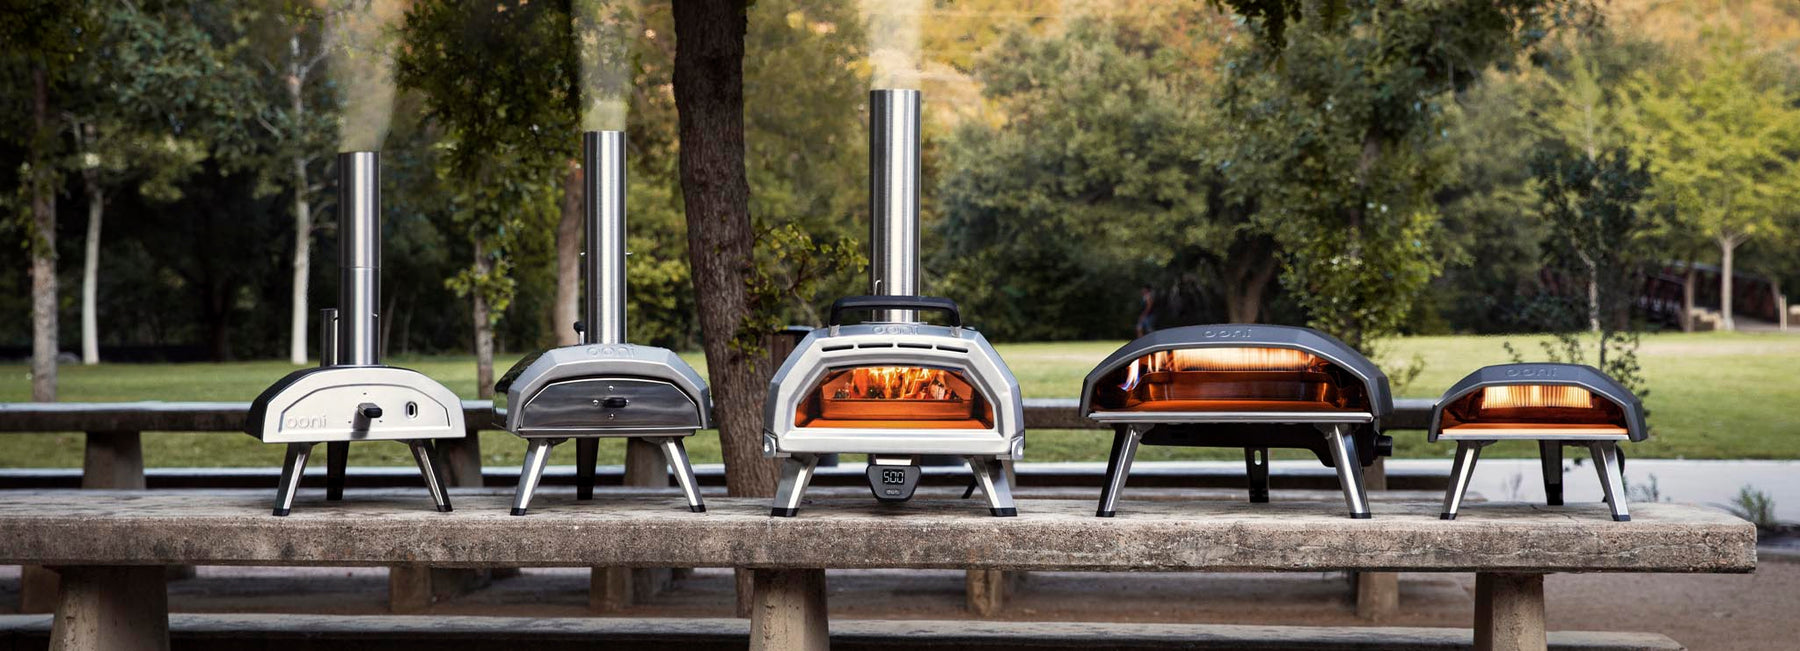 Collection of Ooni pizza ovens including Ooni Karu 16 pizza oven, Ooni Koda 16 pizza oven and Ooni Fyra 12 pizza oven